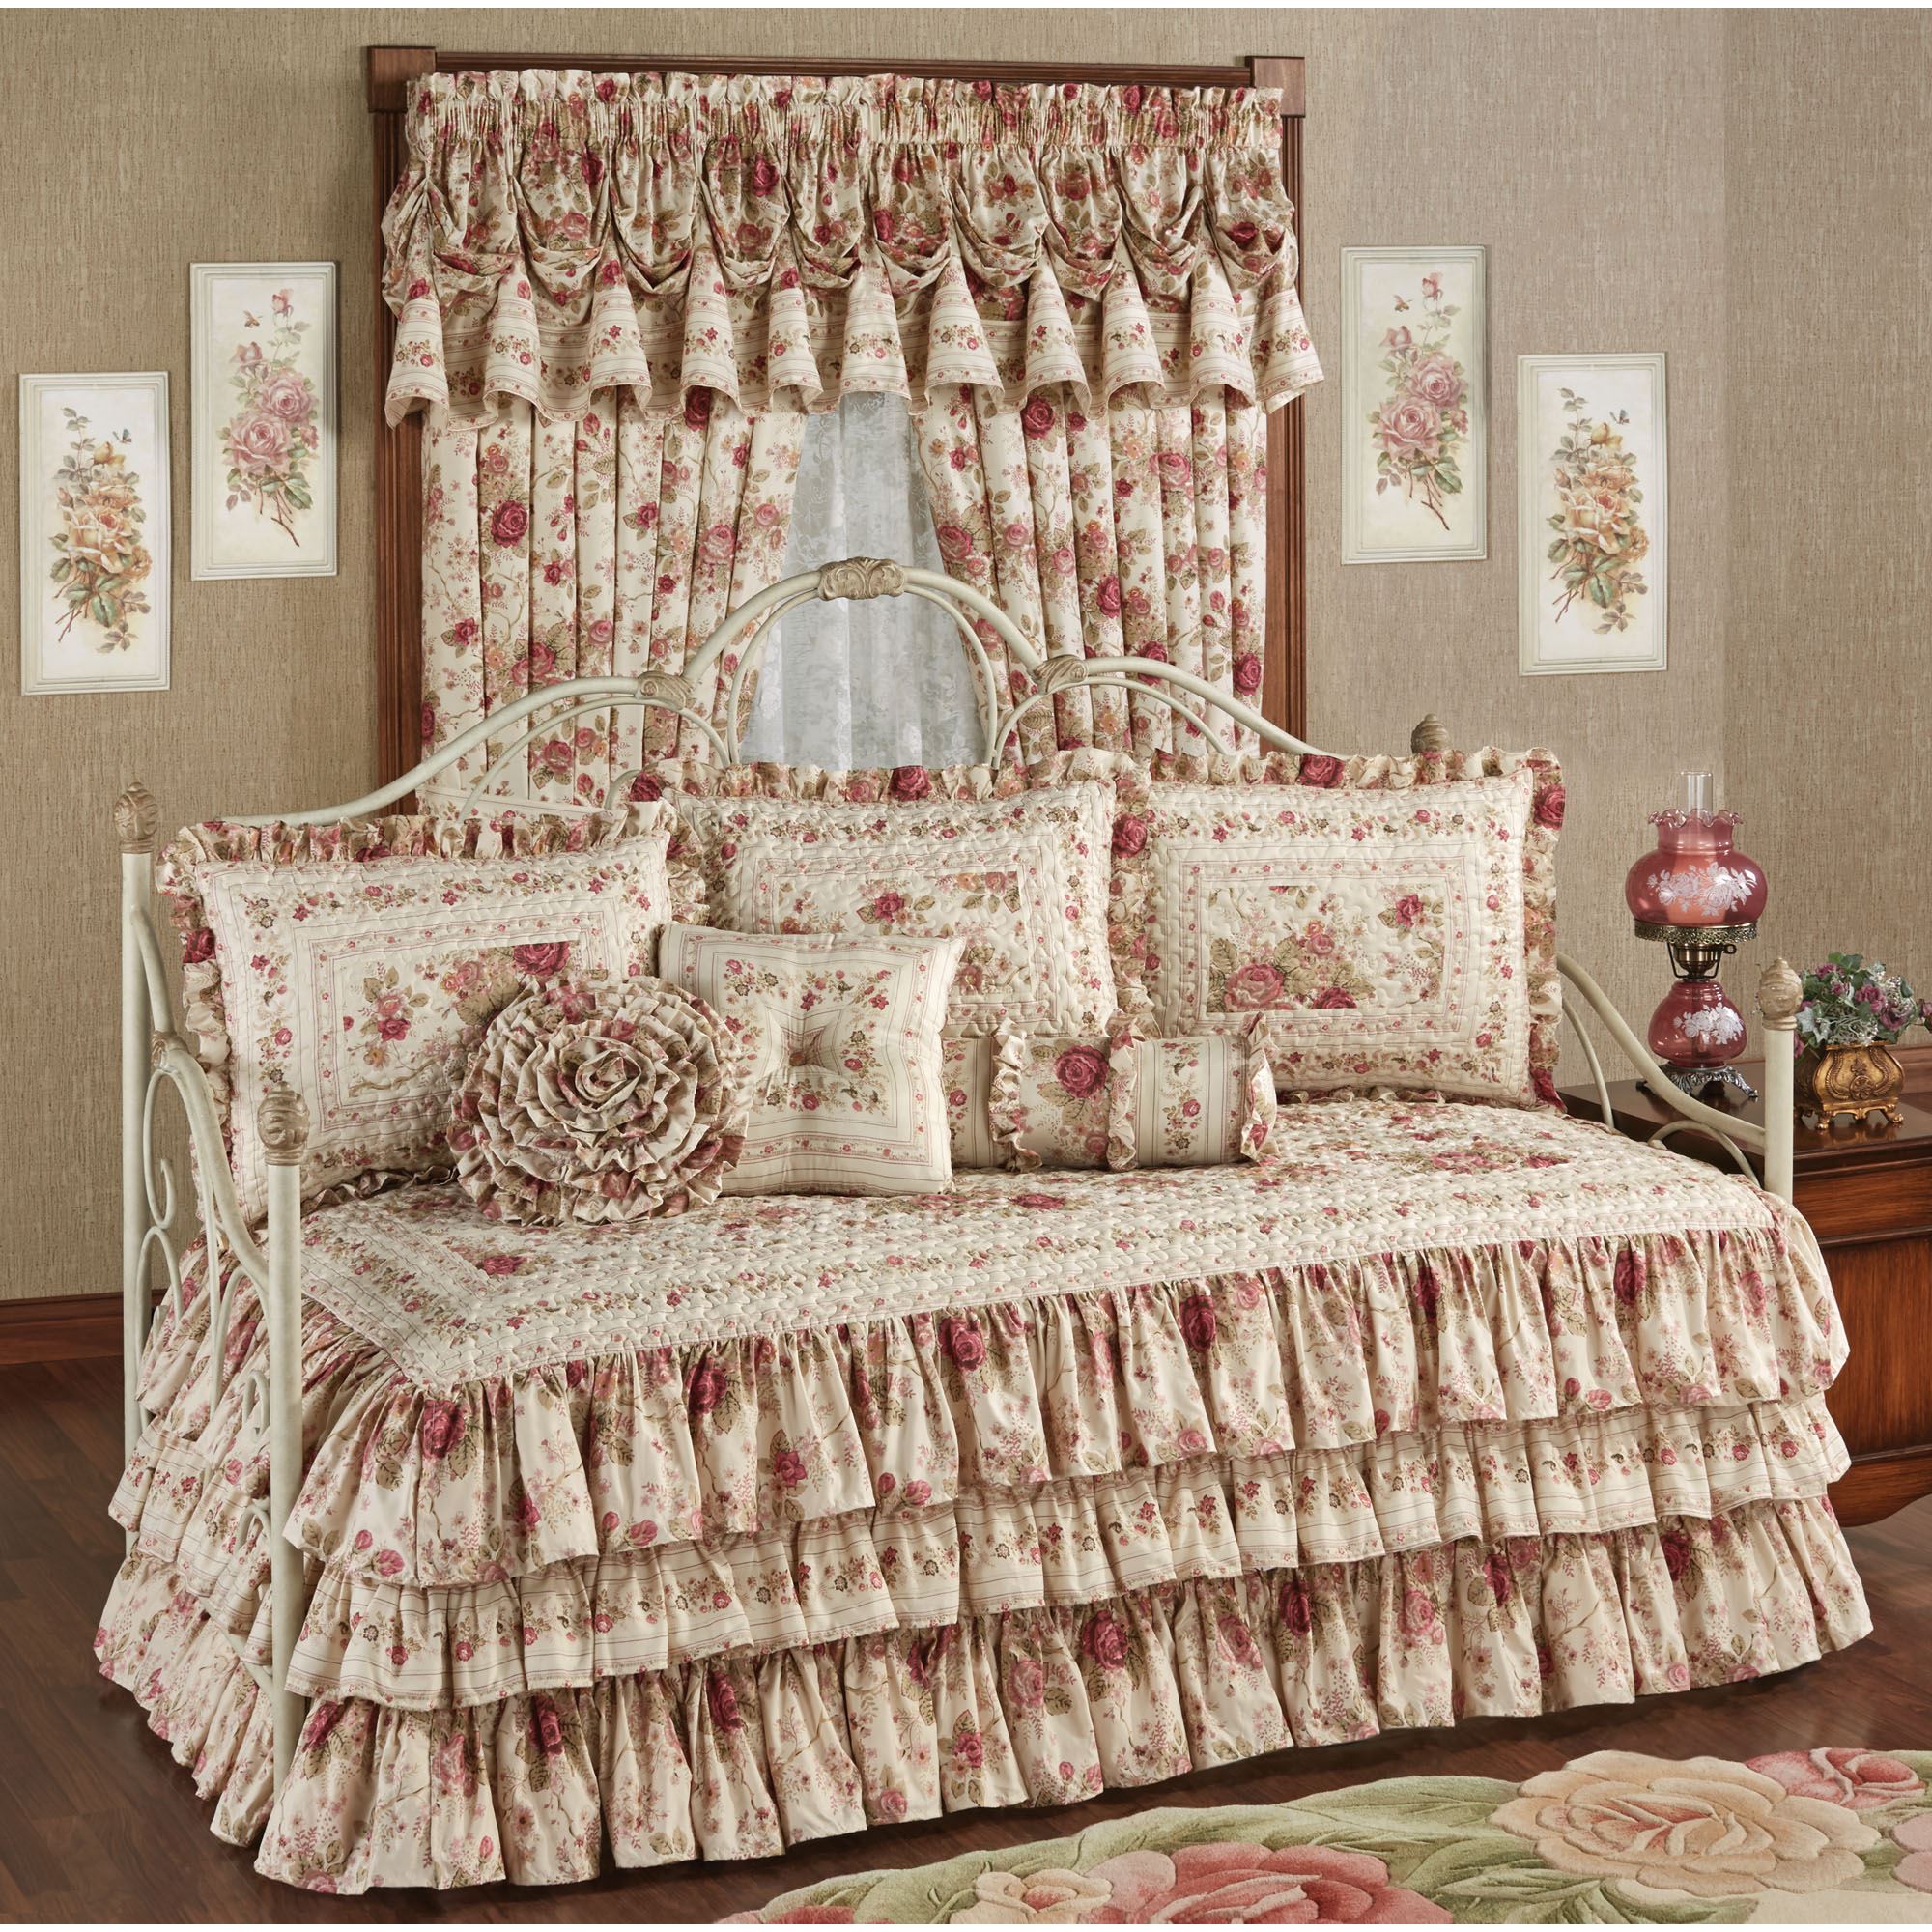 brown daybed bedding sets photo - 5